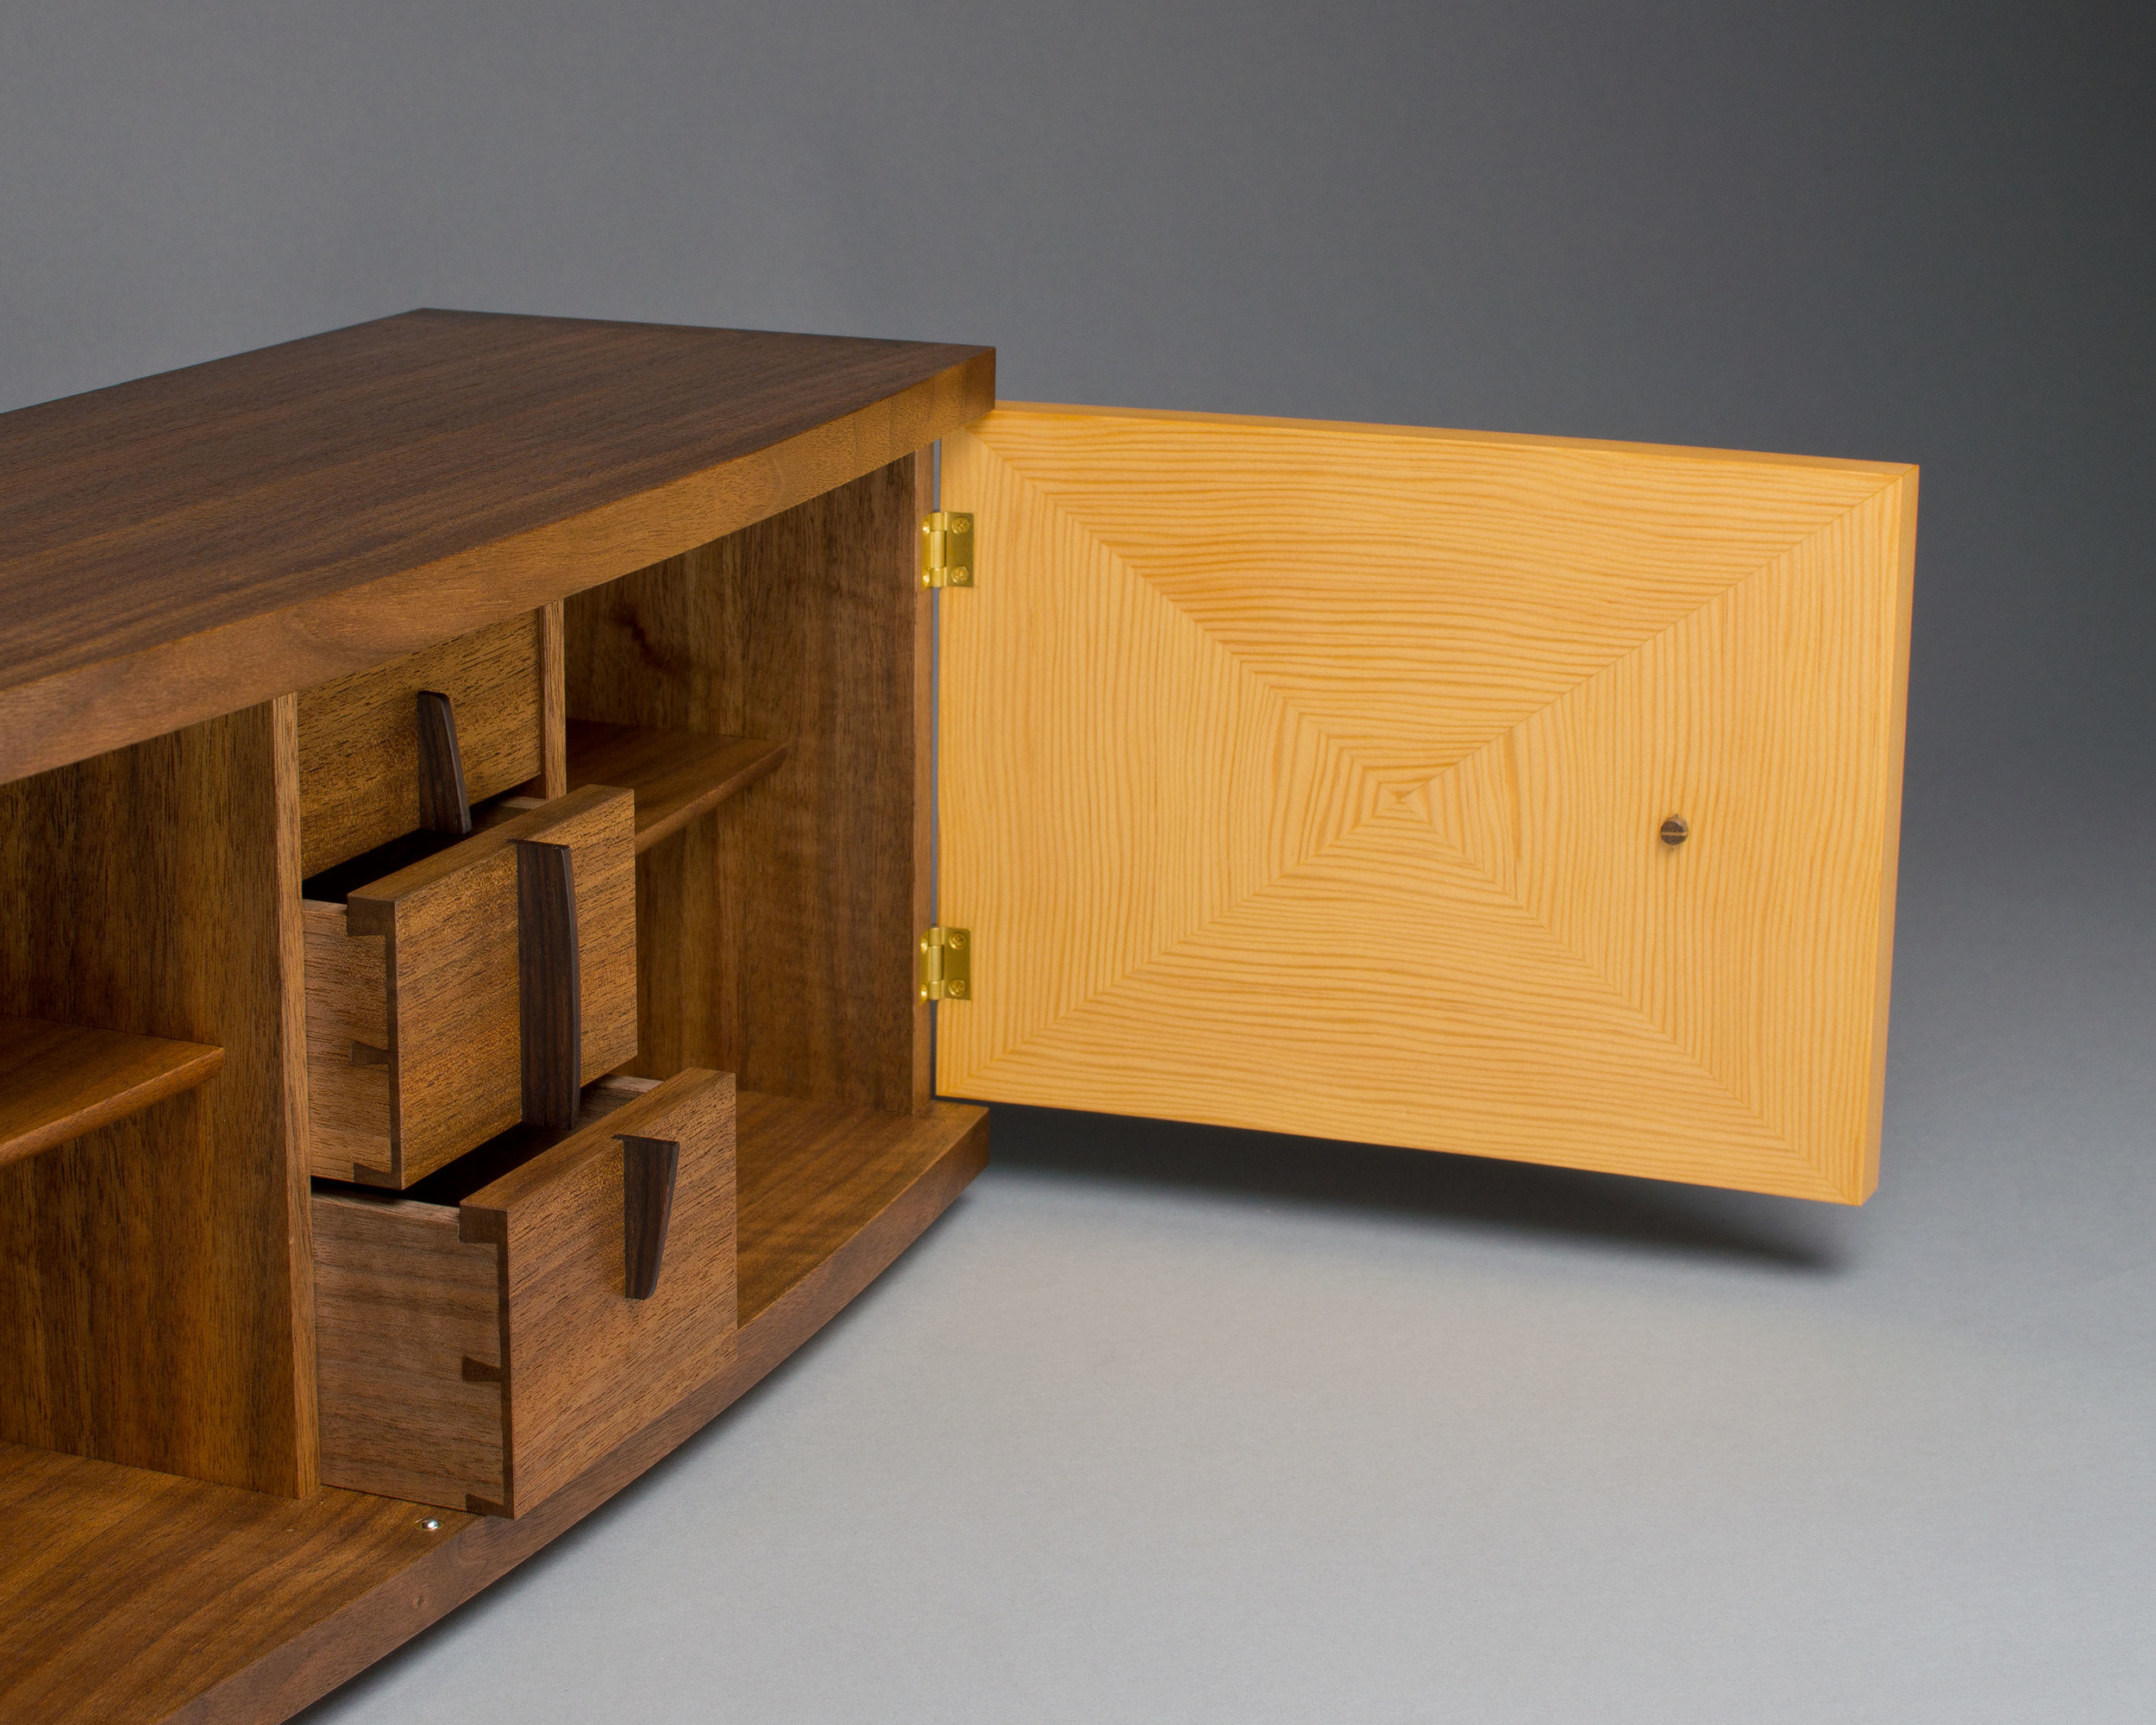 inside the cabinet is a column of three small dovetailed drawers